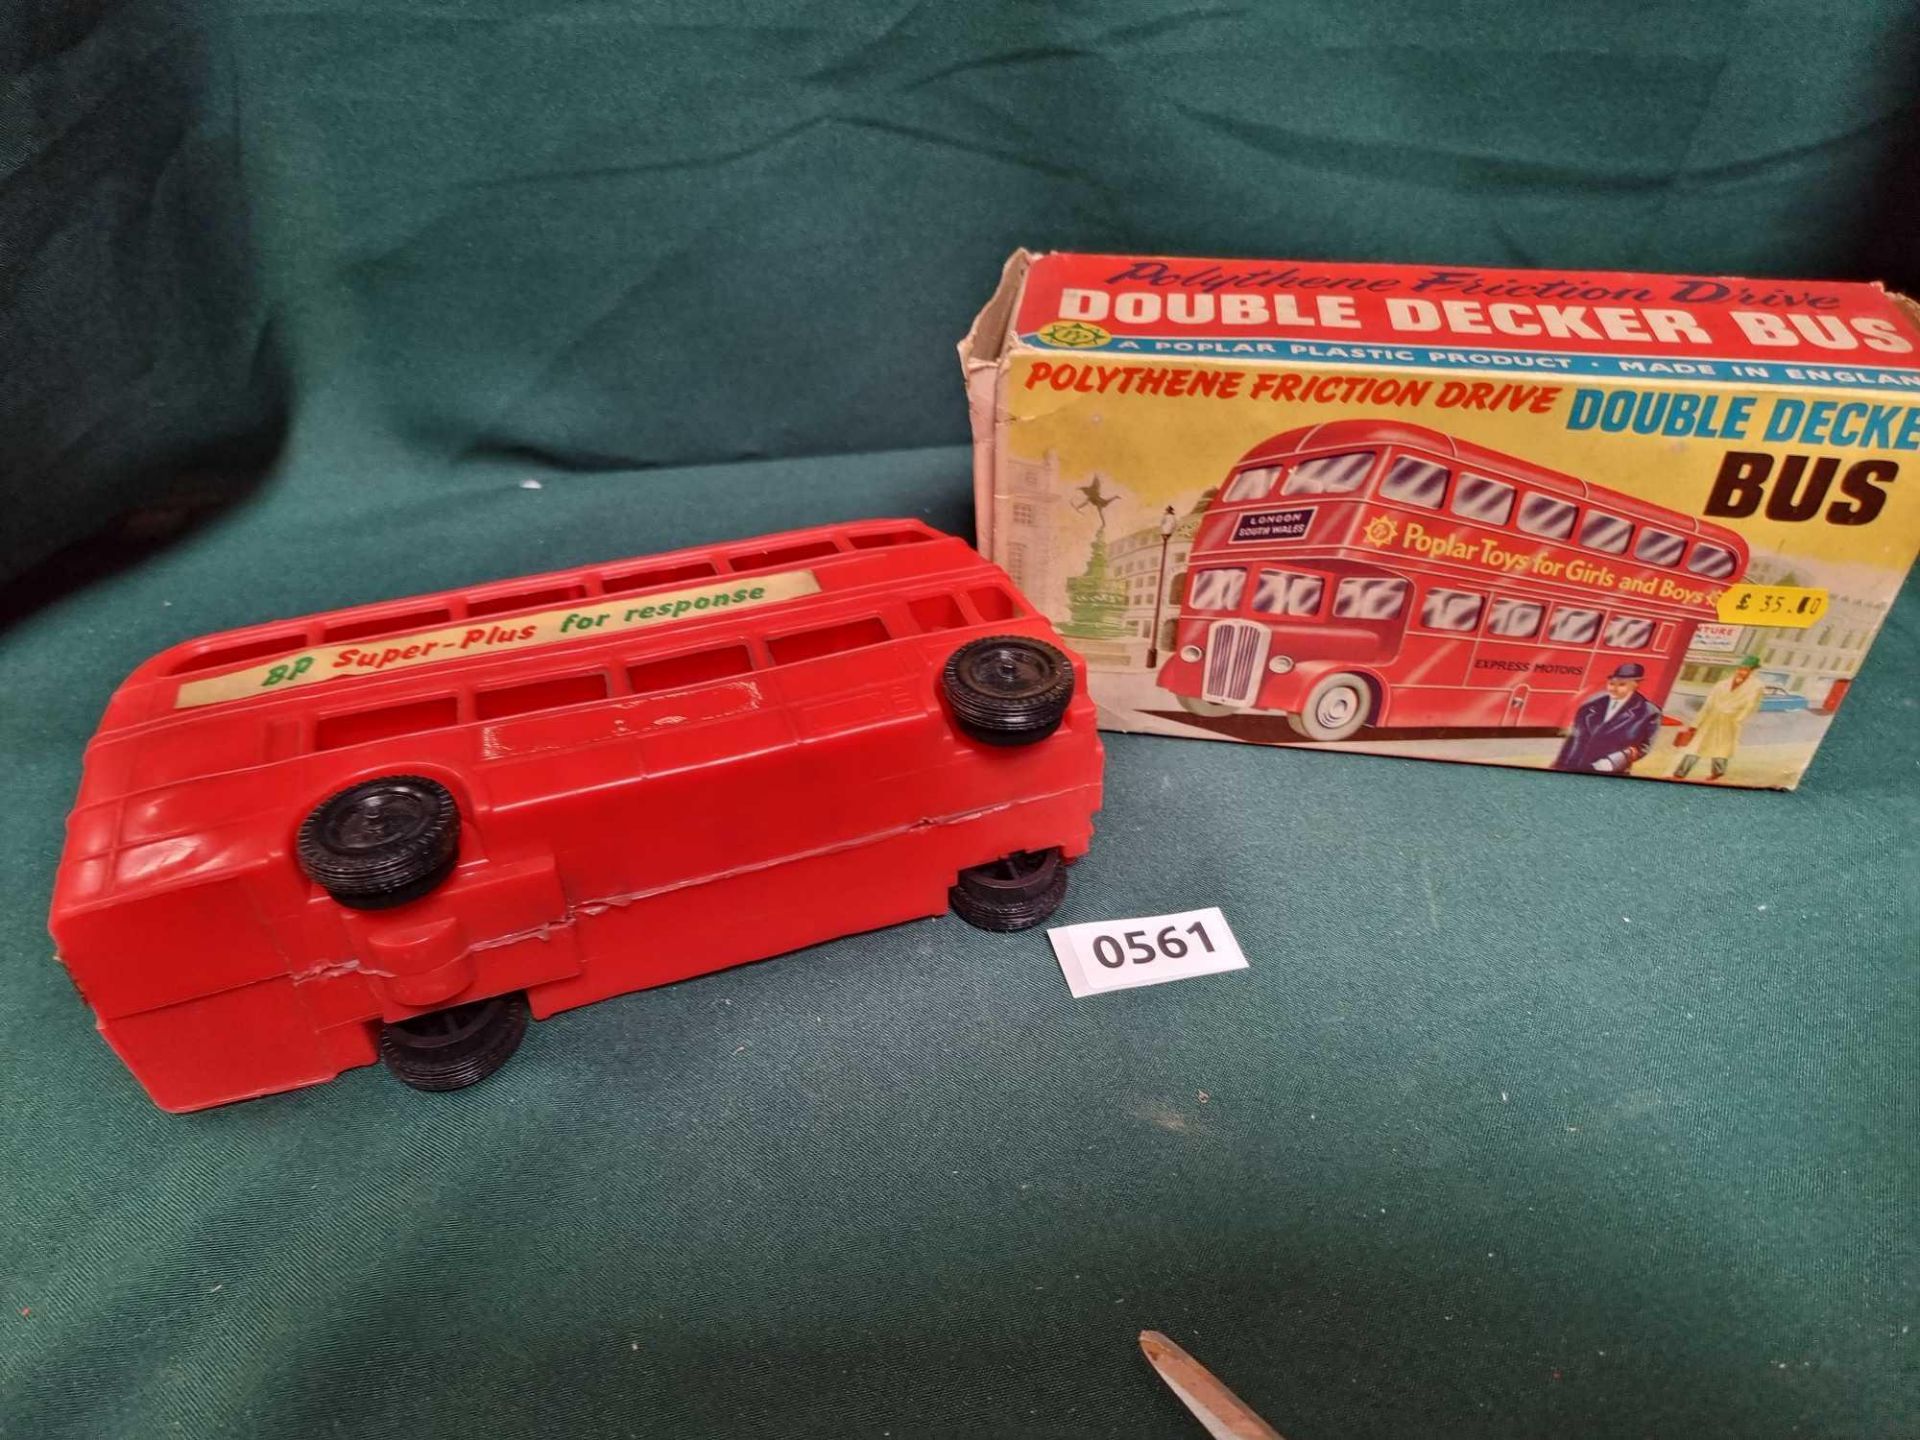 Poplar Plastics Polythene Friction Drive Double Decker Bus In Box Made In England With Original Box - Image 3 of 4